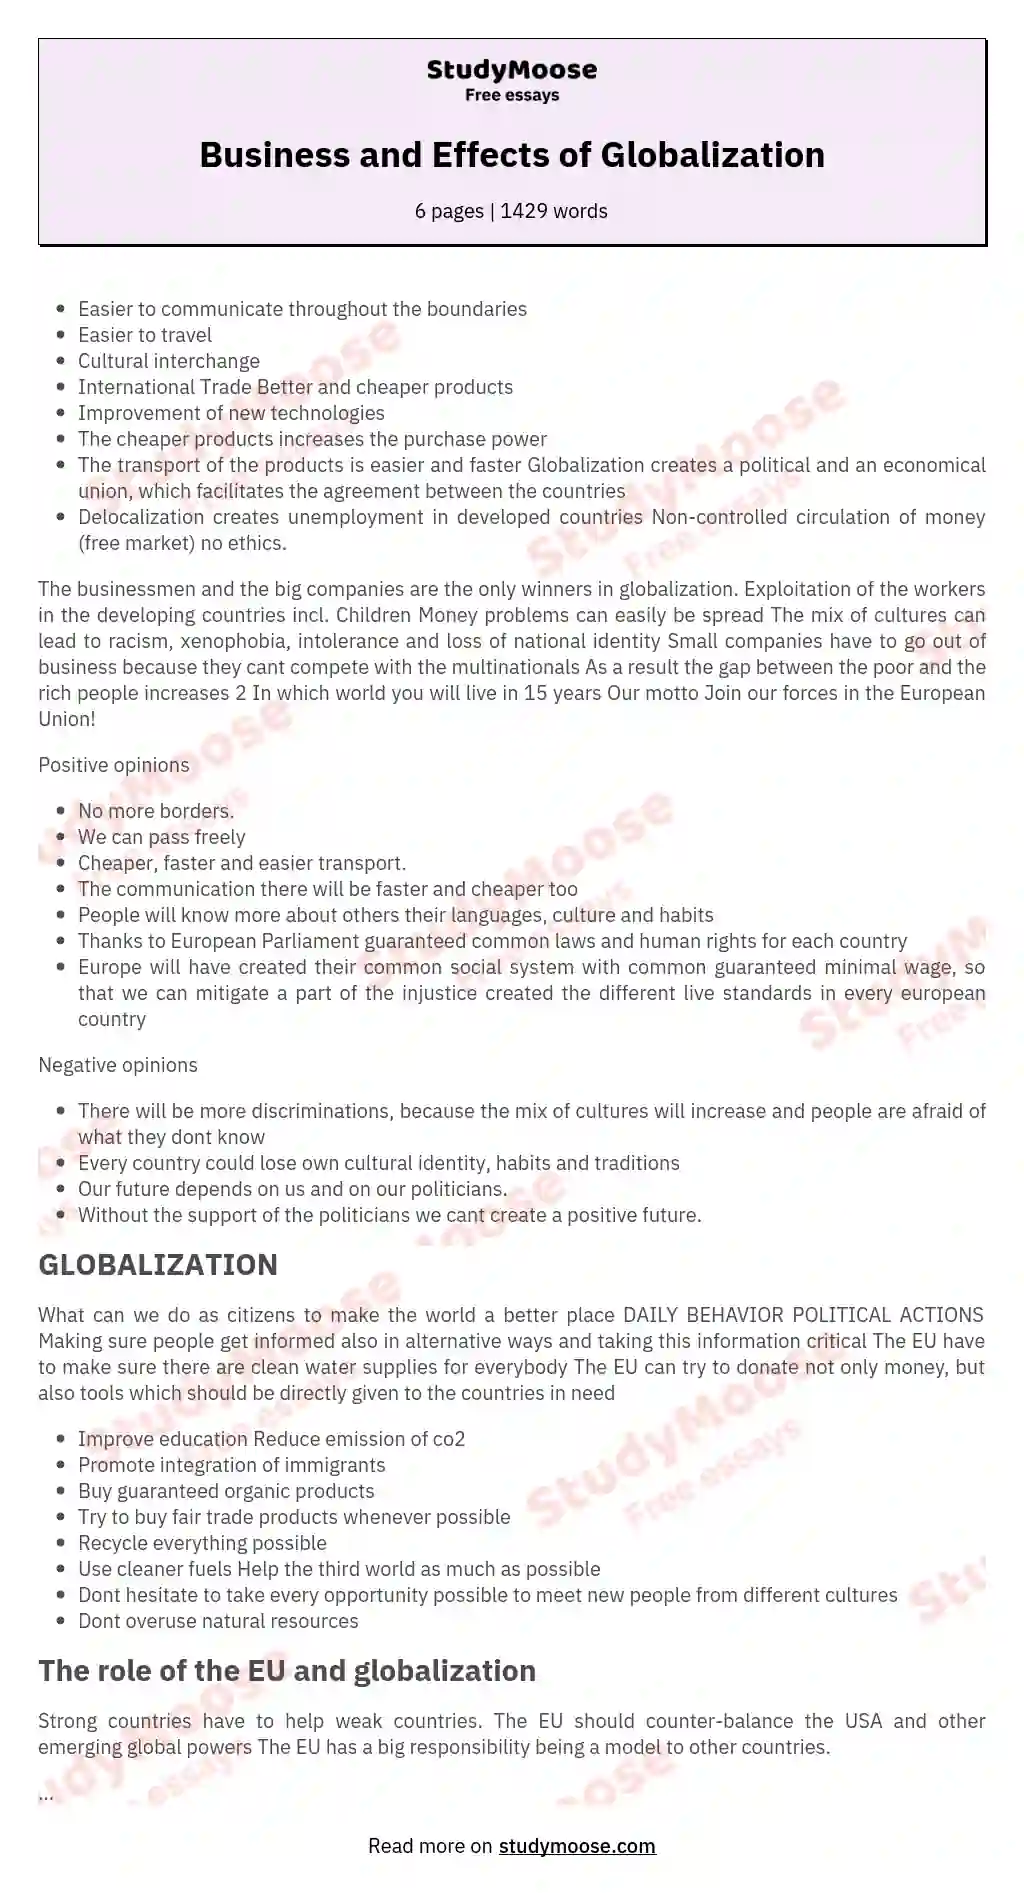 Business and Effects of Globalization essay